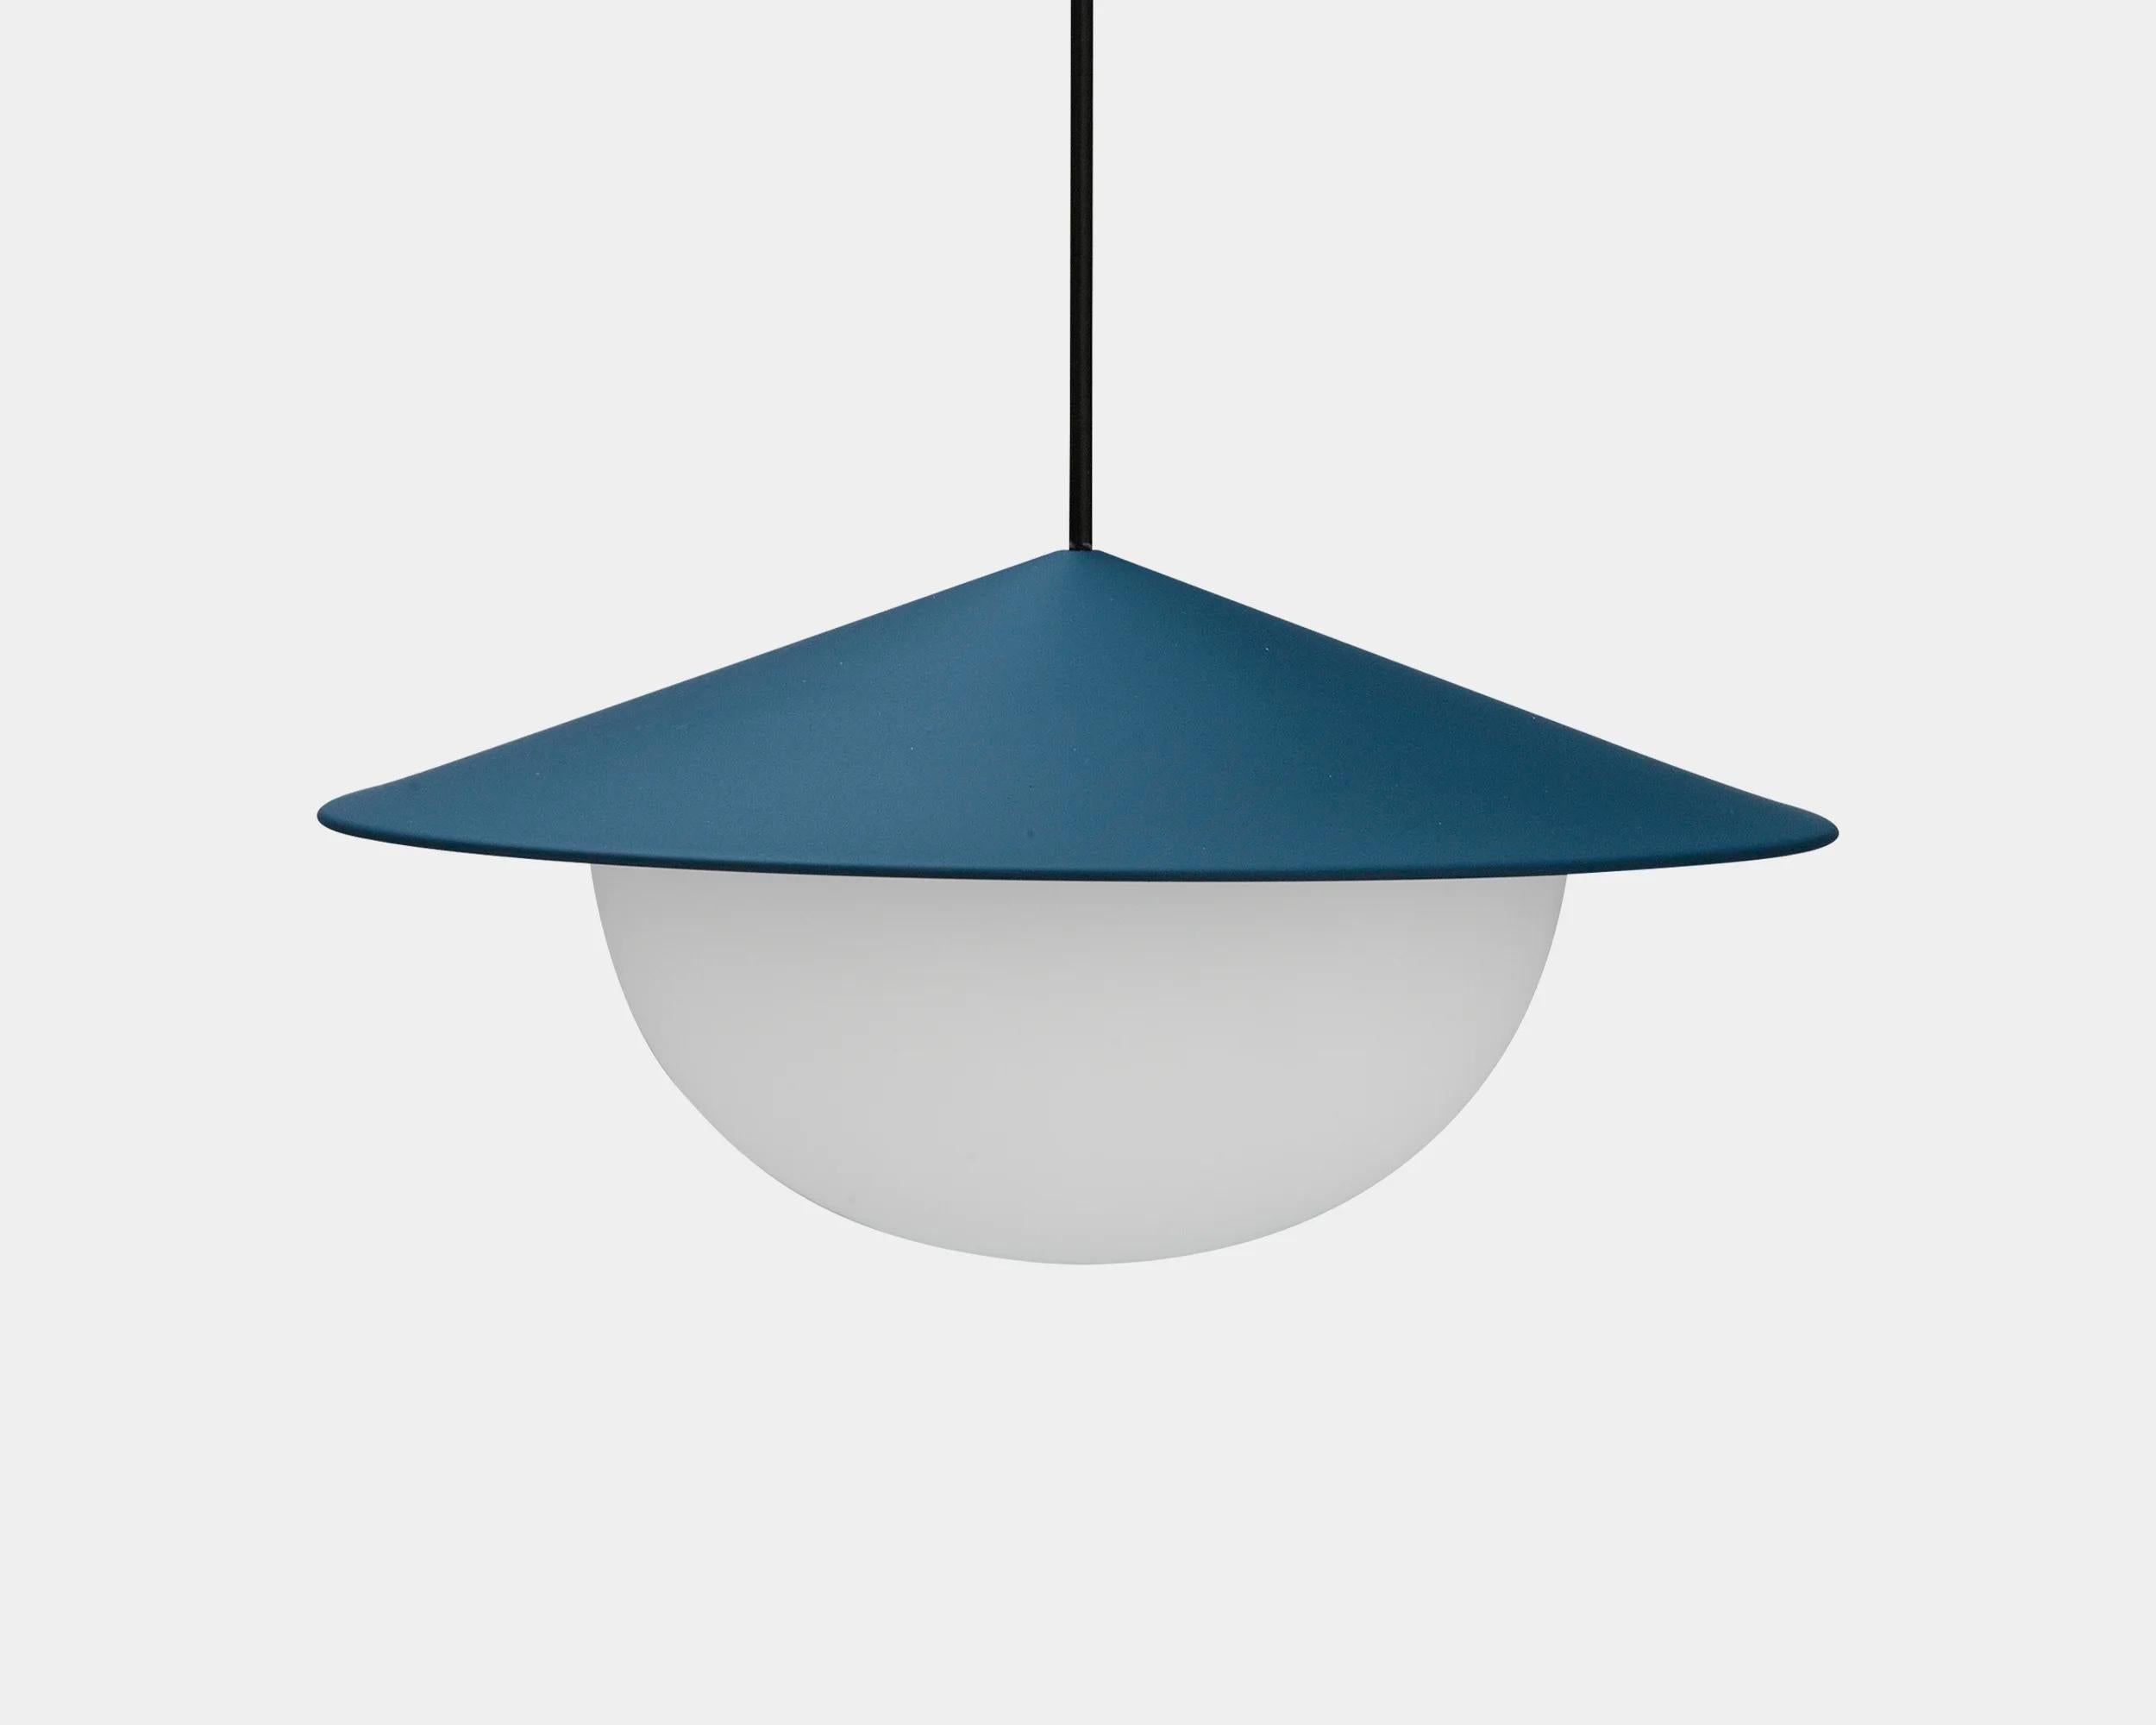 Alley pendant lamp by AGO Lighting
UL Listed

Painted aluminum, white opal glass
LED G9 110-240V (not included)

Available colors:
Charcoal, white, grey, burgundy, green, mustard, dark blue, mud grey, brick red

Dimensions:
15.8 x 34 cm (Large)
11 x